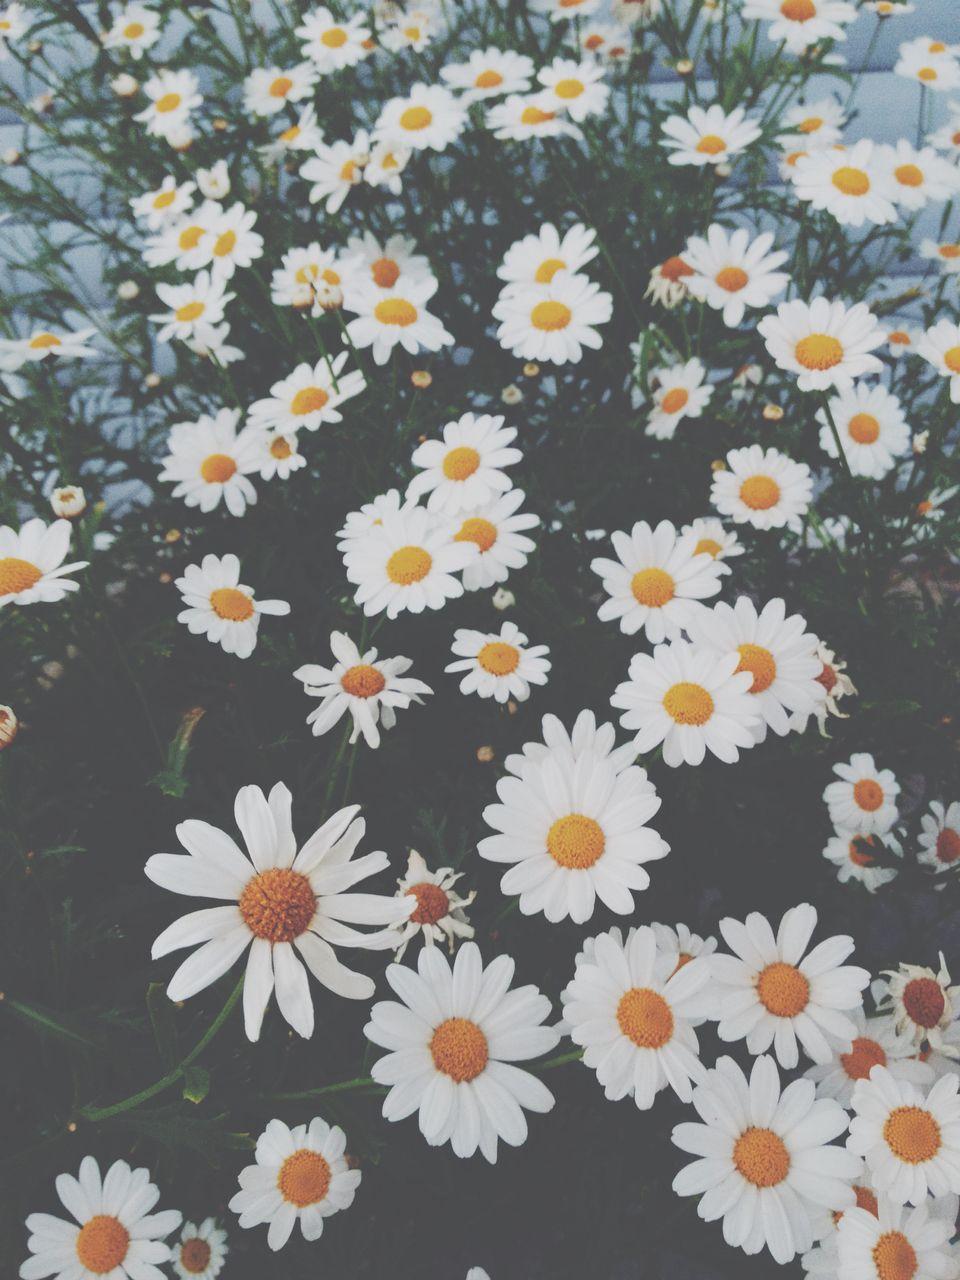 Hipster Daisy Wallpapers - Top Free Hipster Daisy Backgrounds ...